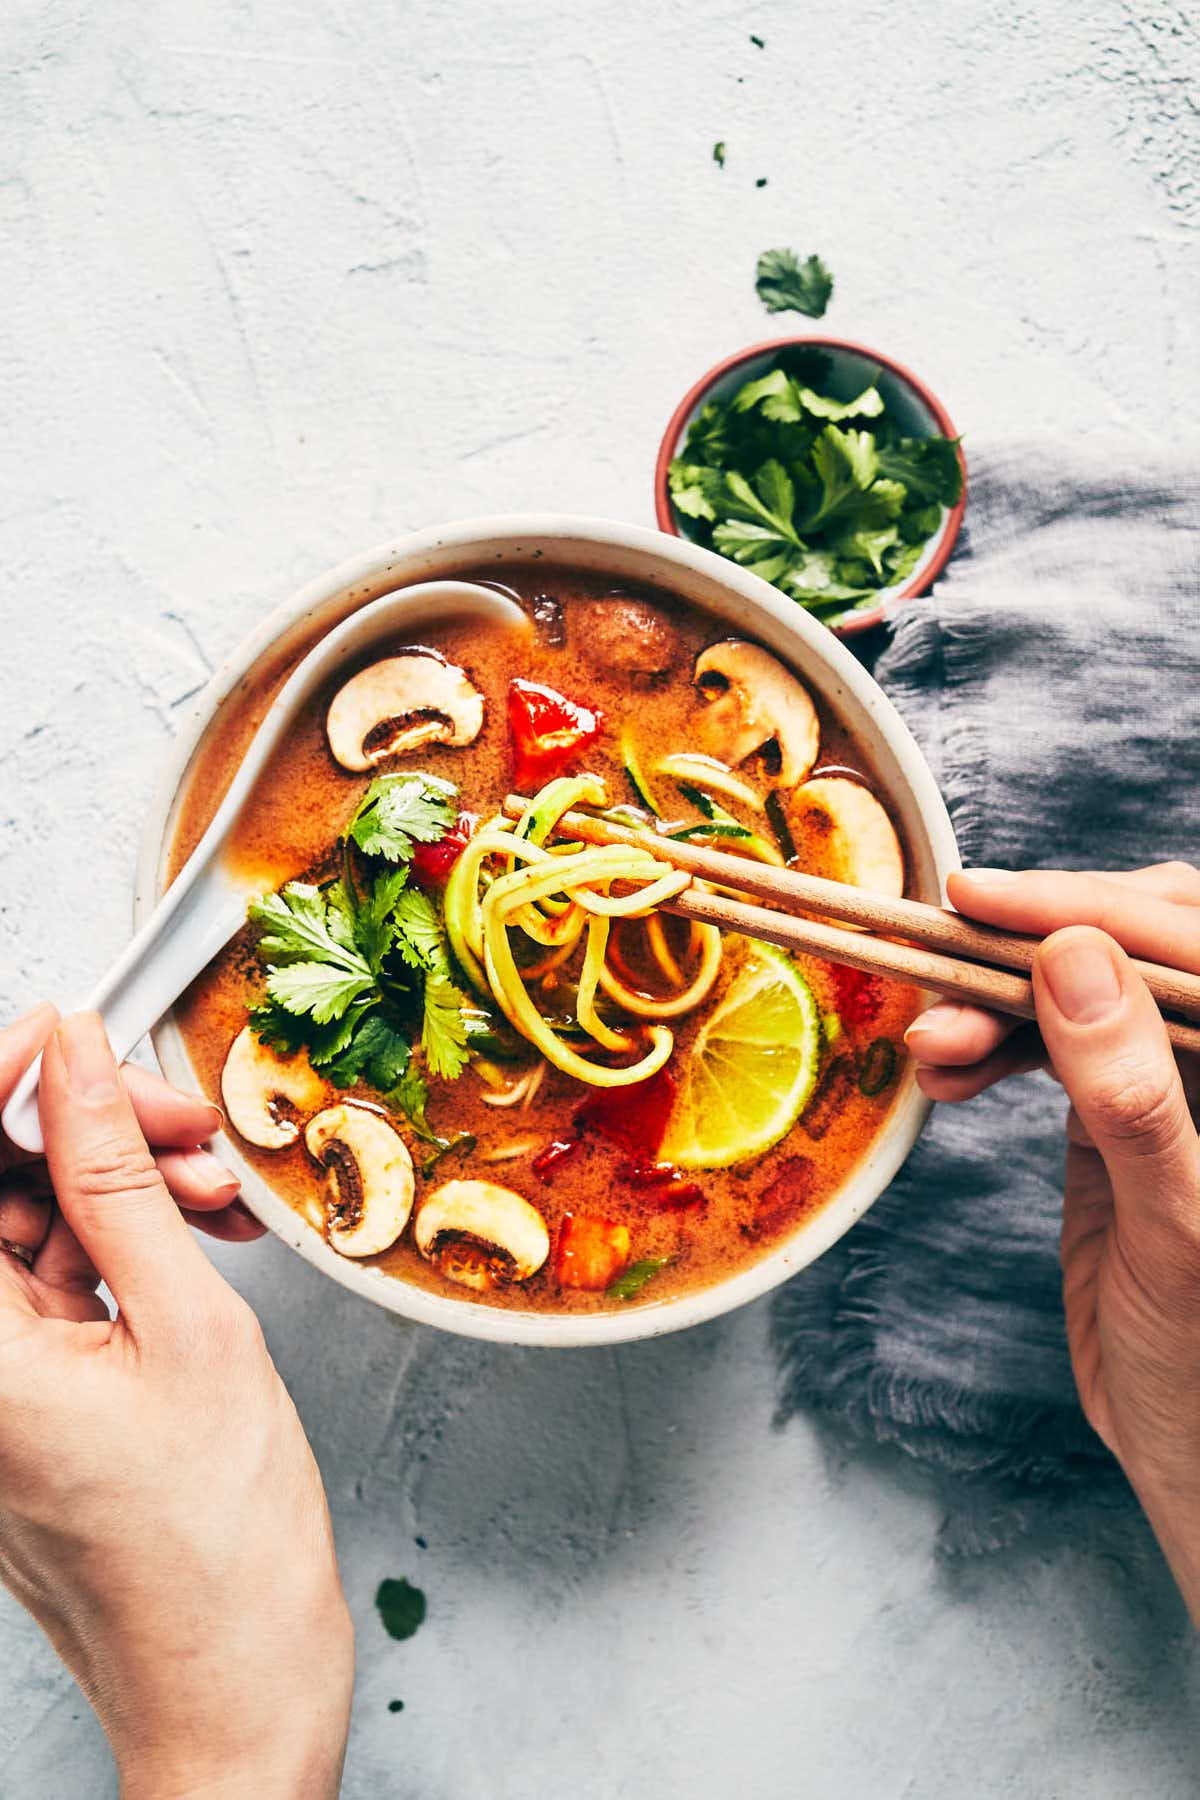 Hands digging into vegan tom yum soup with chopsticks and spoon